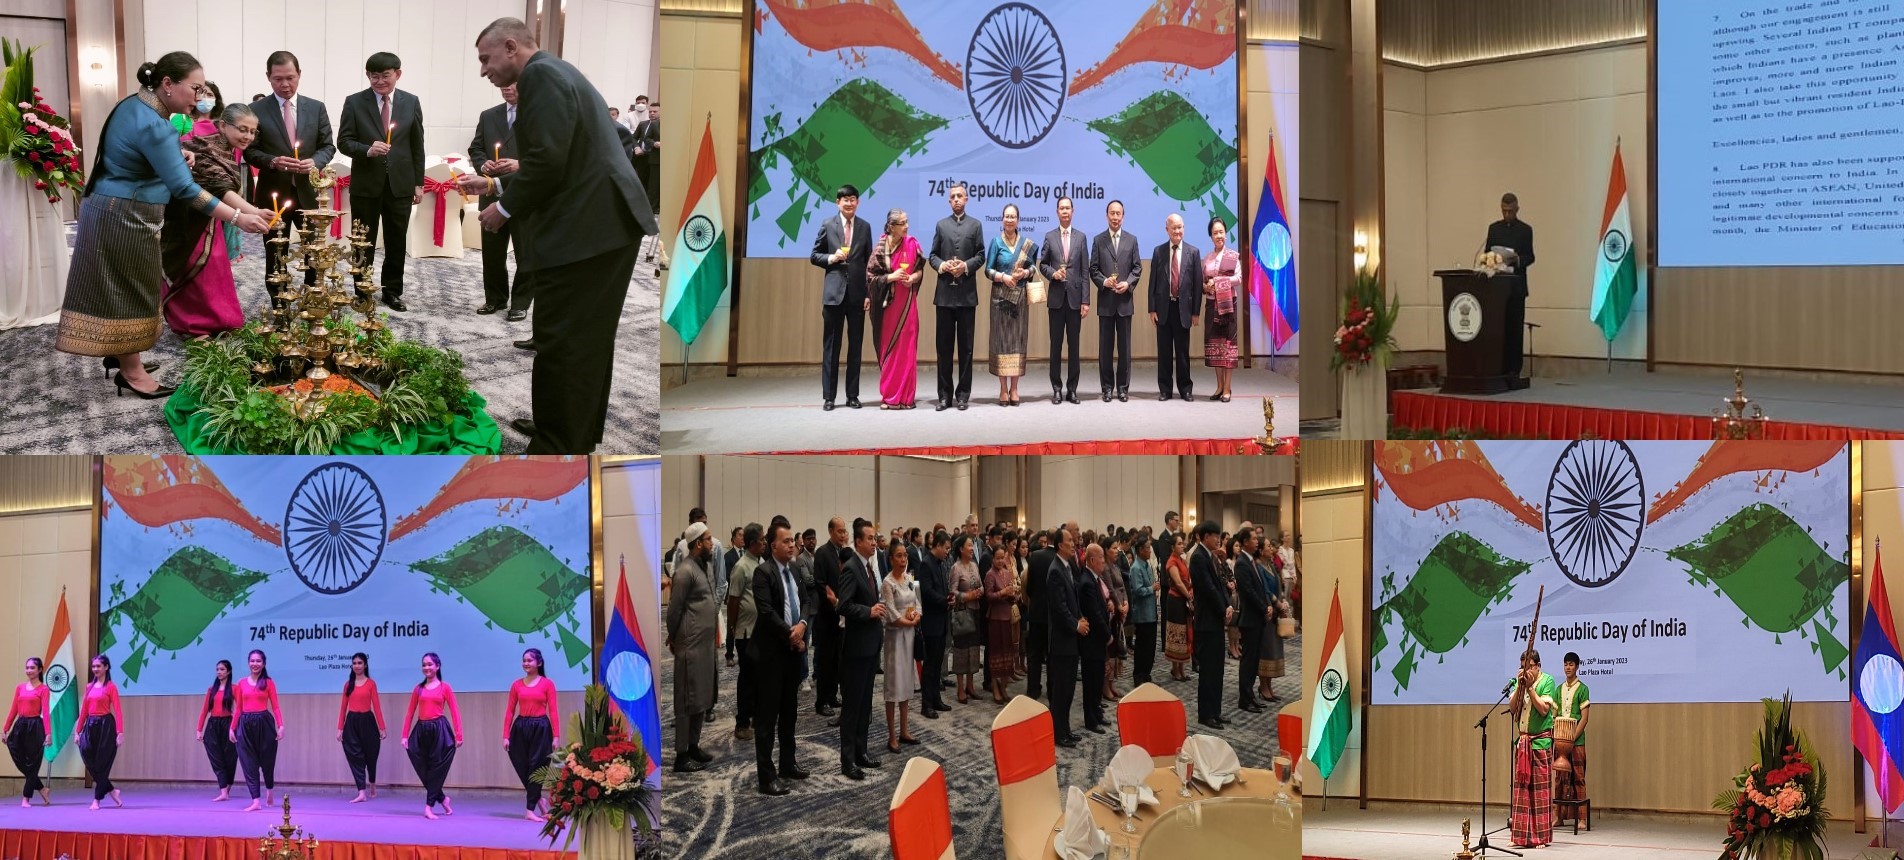 Reception hosted by Ambassador on the occasion of 74th Republic Day of India